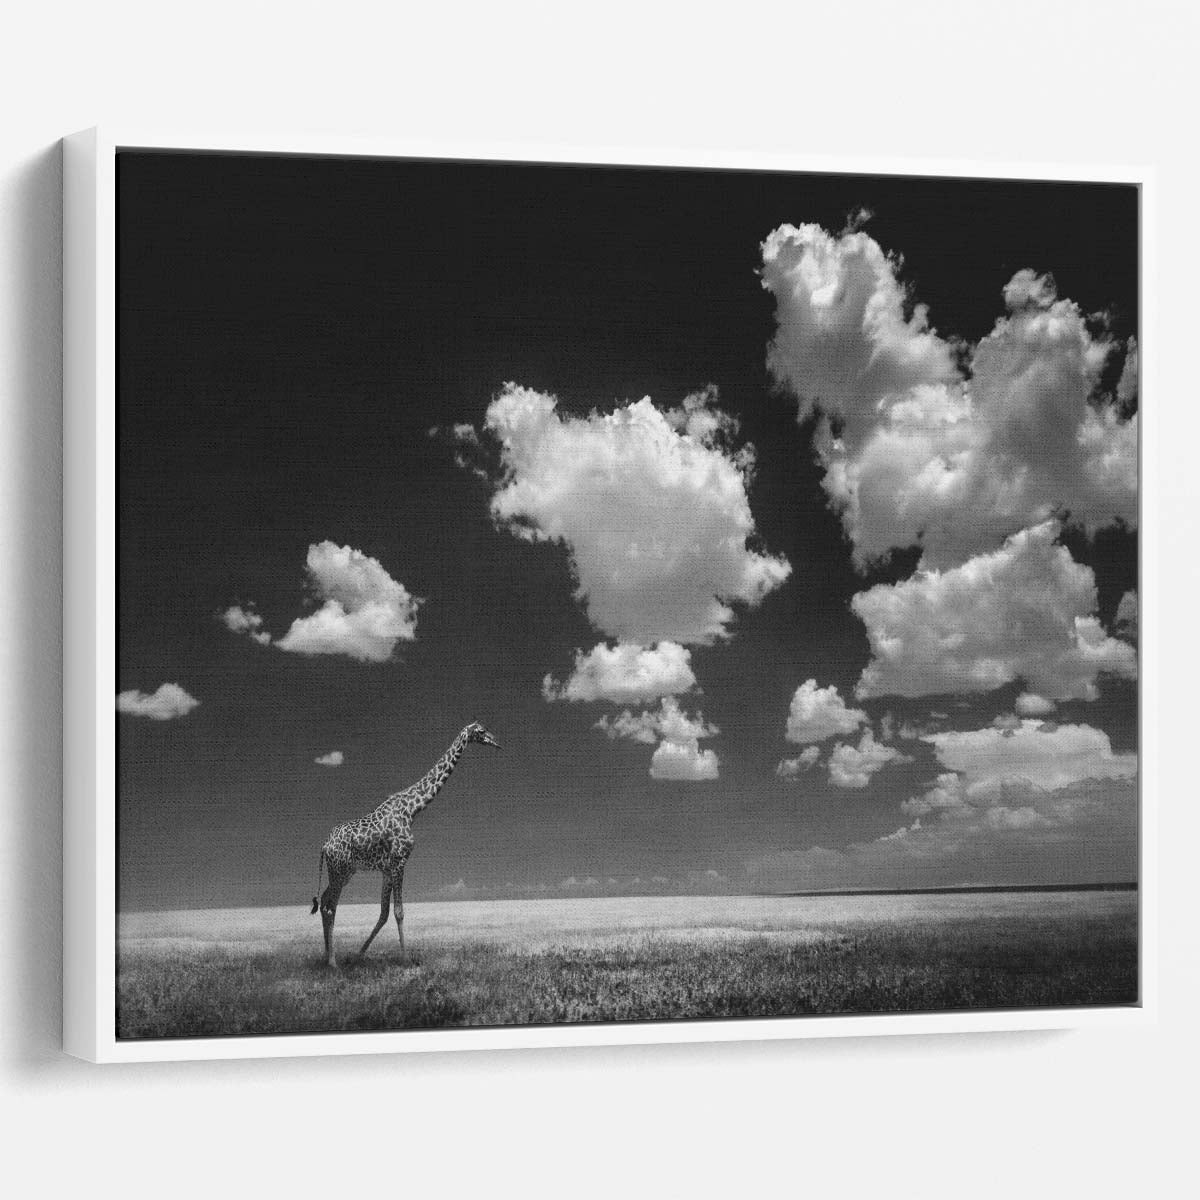 Monochrome Giraffe in Cloudy African Sky Wall Art by Luxuriance Designs. Made in USA.